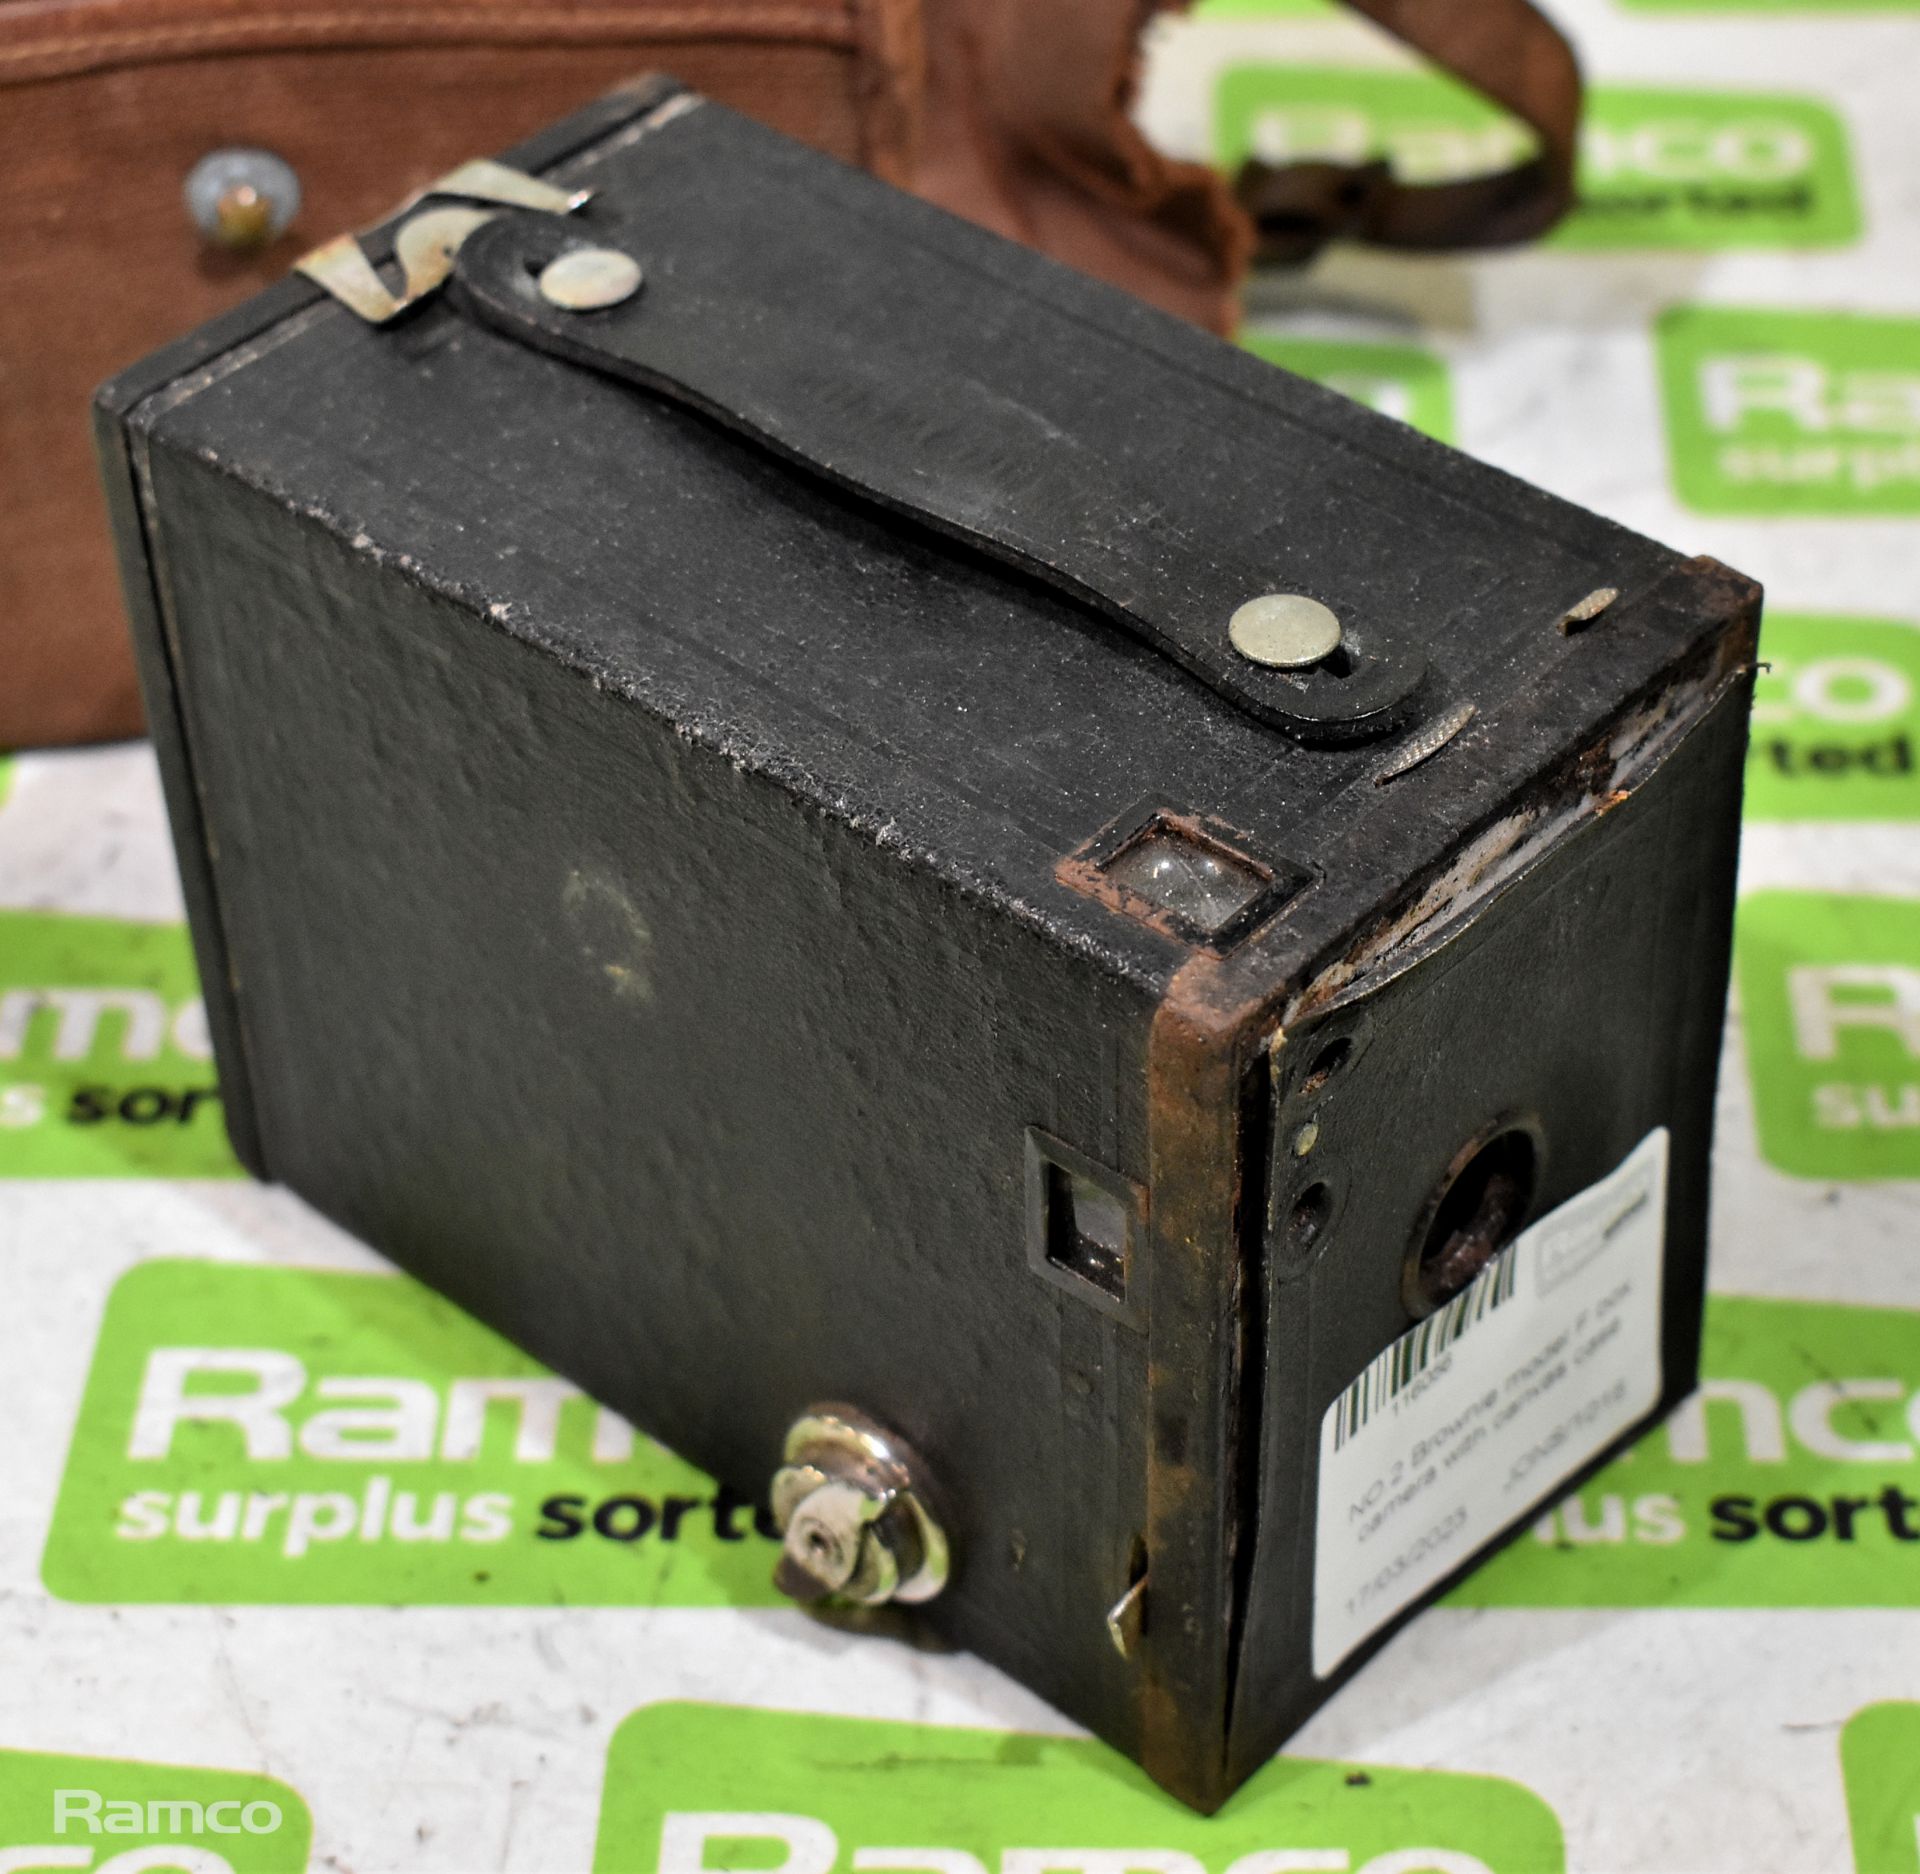 NO.2 Brownie model F box camera with canvas case - Image 2 of 6